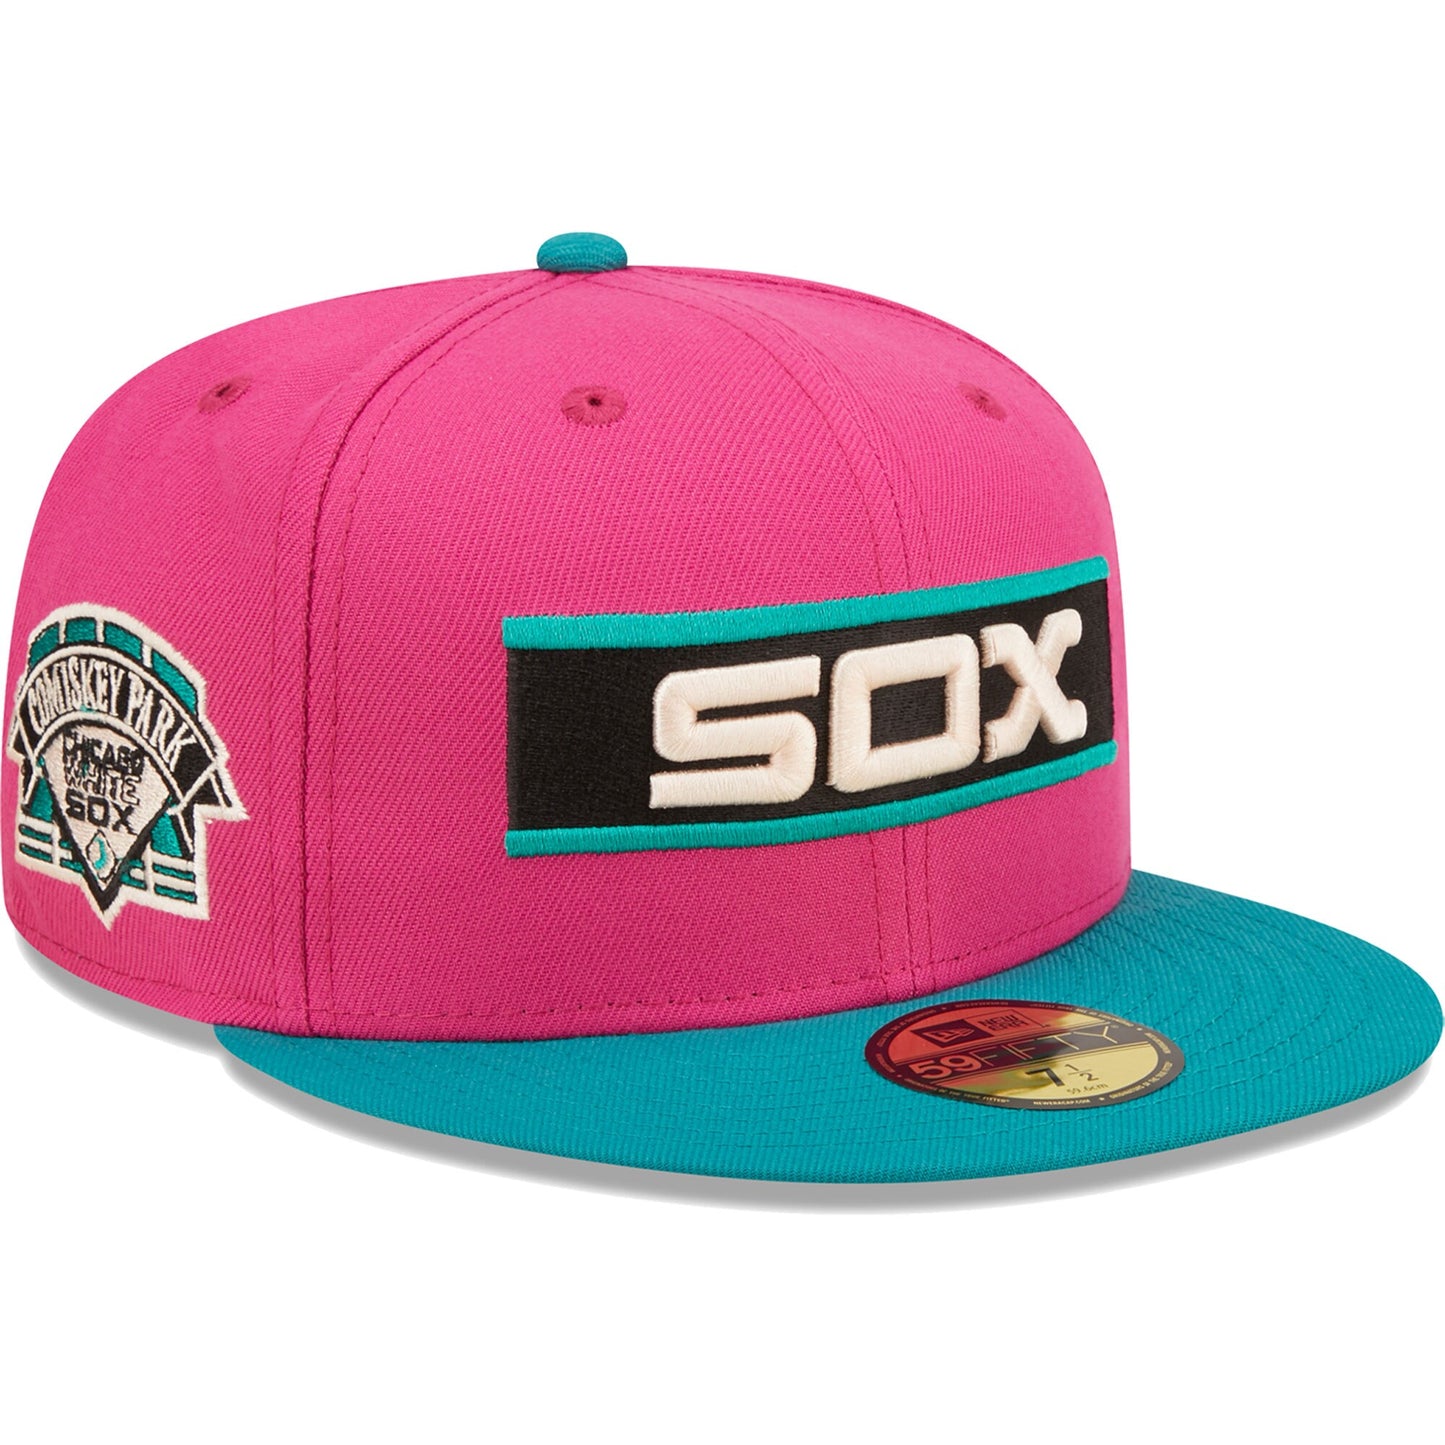 Chicago White Sox New Era Cooperstown Collection Comiskey Park Passion Forest 59FIFTY Fitted Hat - Pink/Green